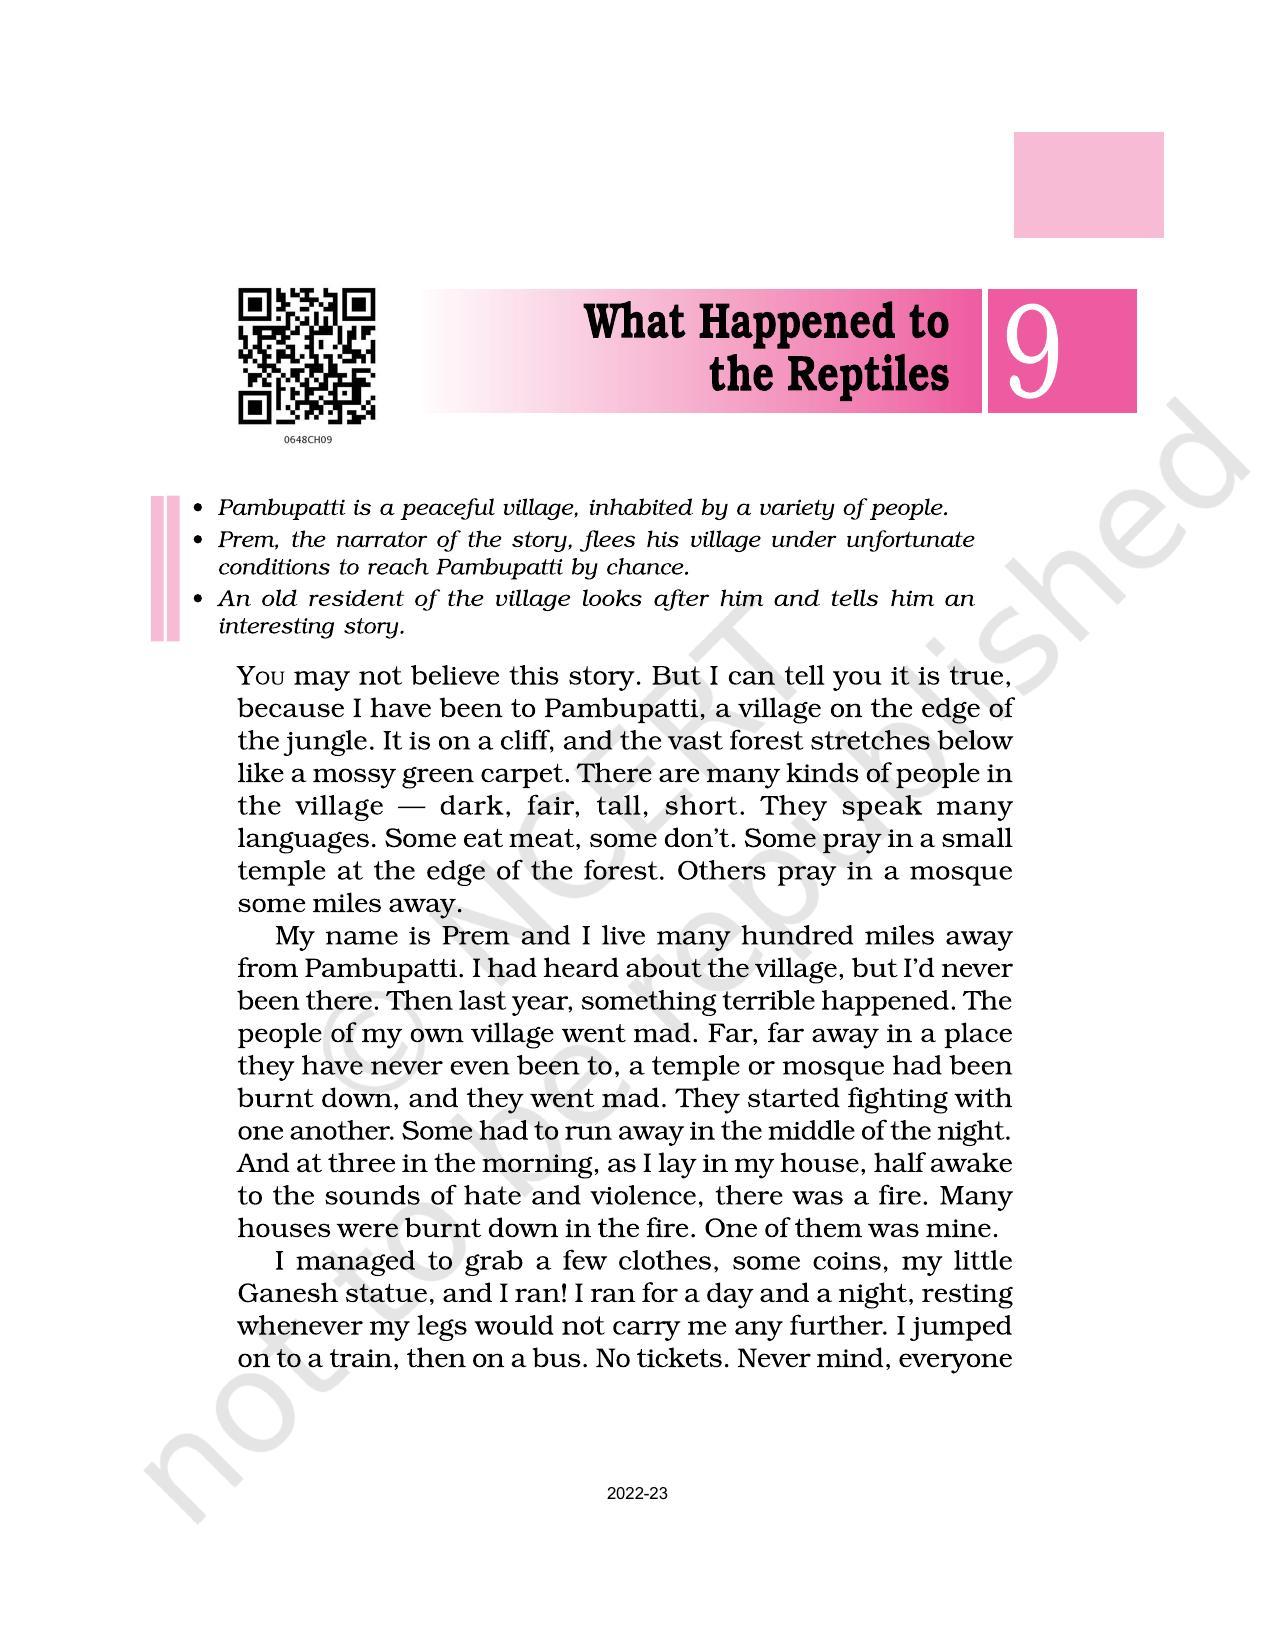 NCERT Book for Class 6 English(A Pact with the Sun) : Chapter 9-What Happened to the Reptiles - Page 1